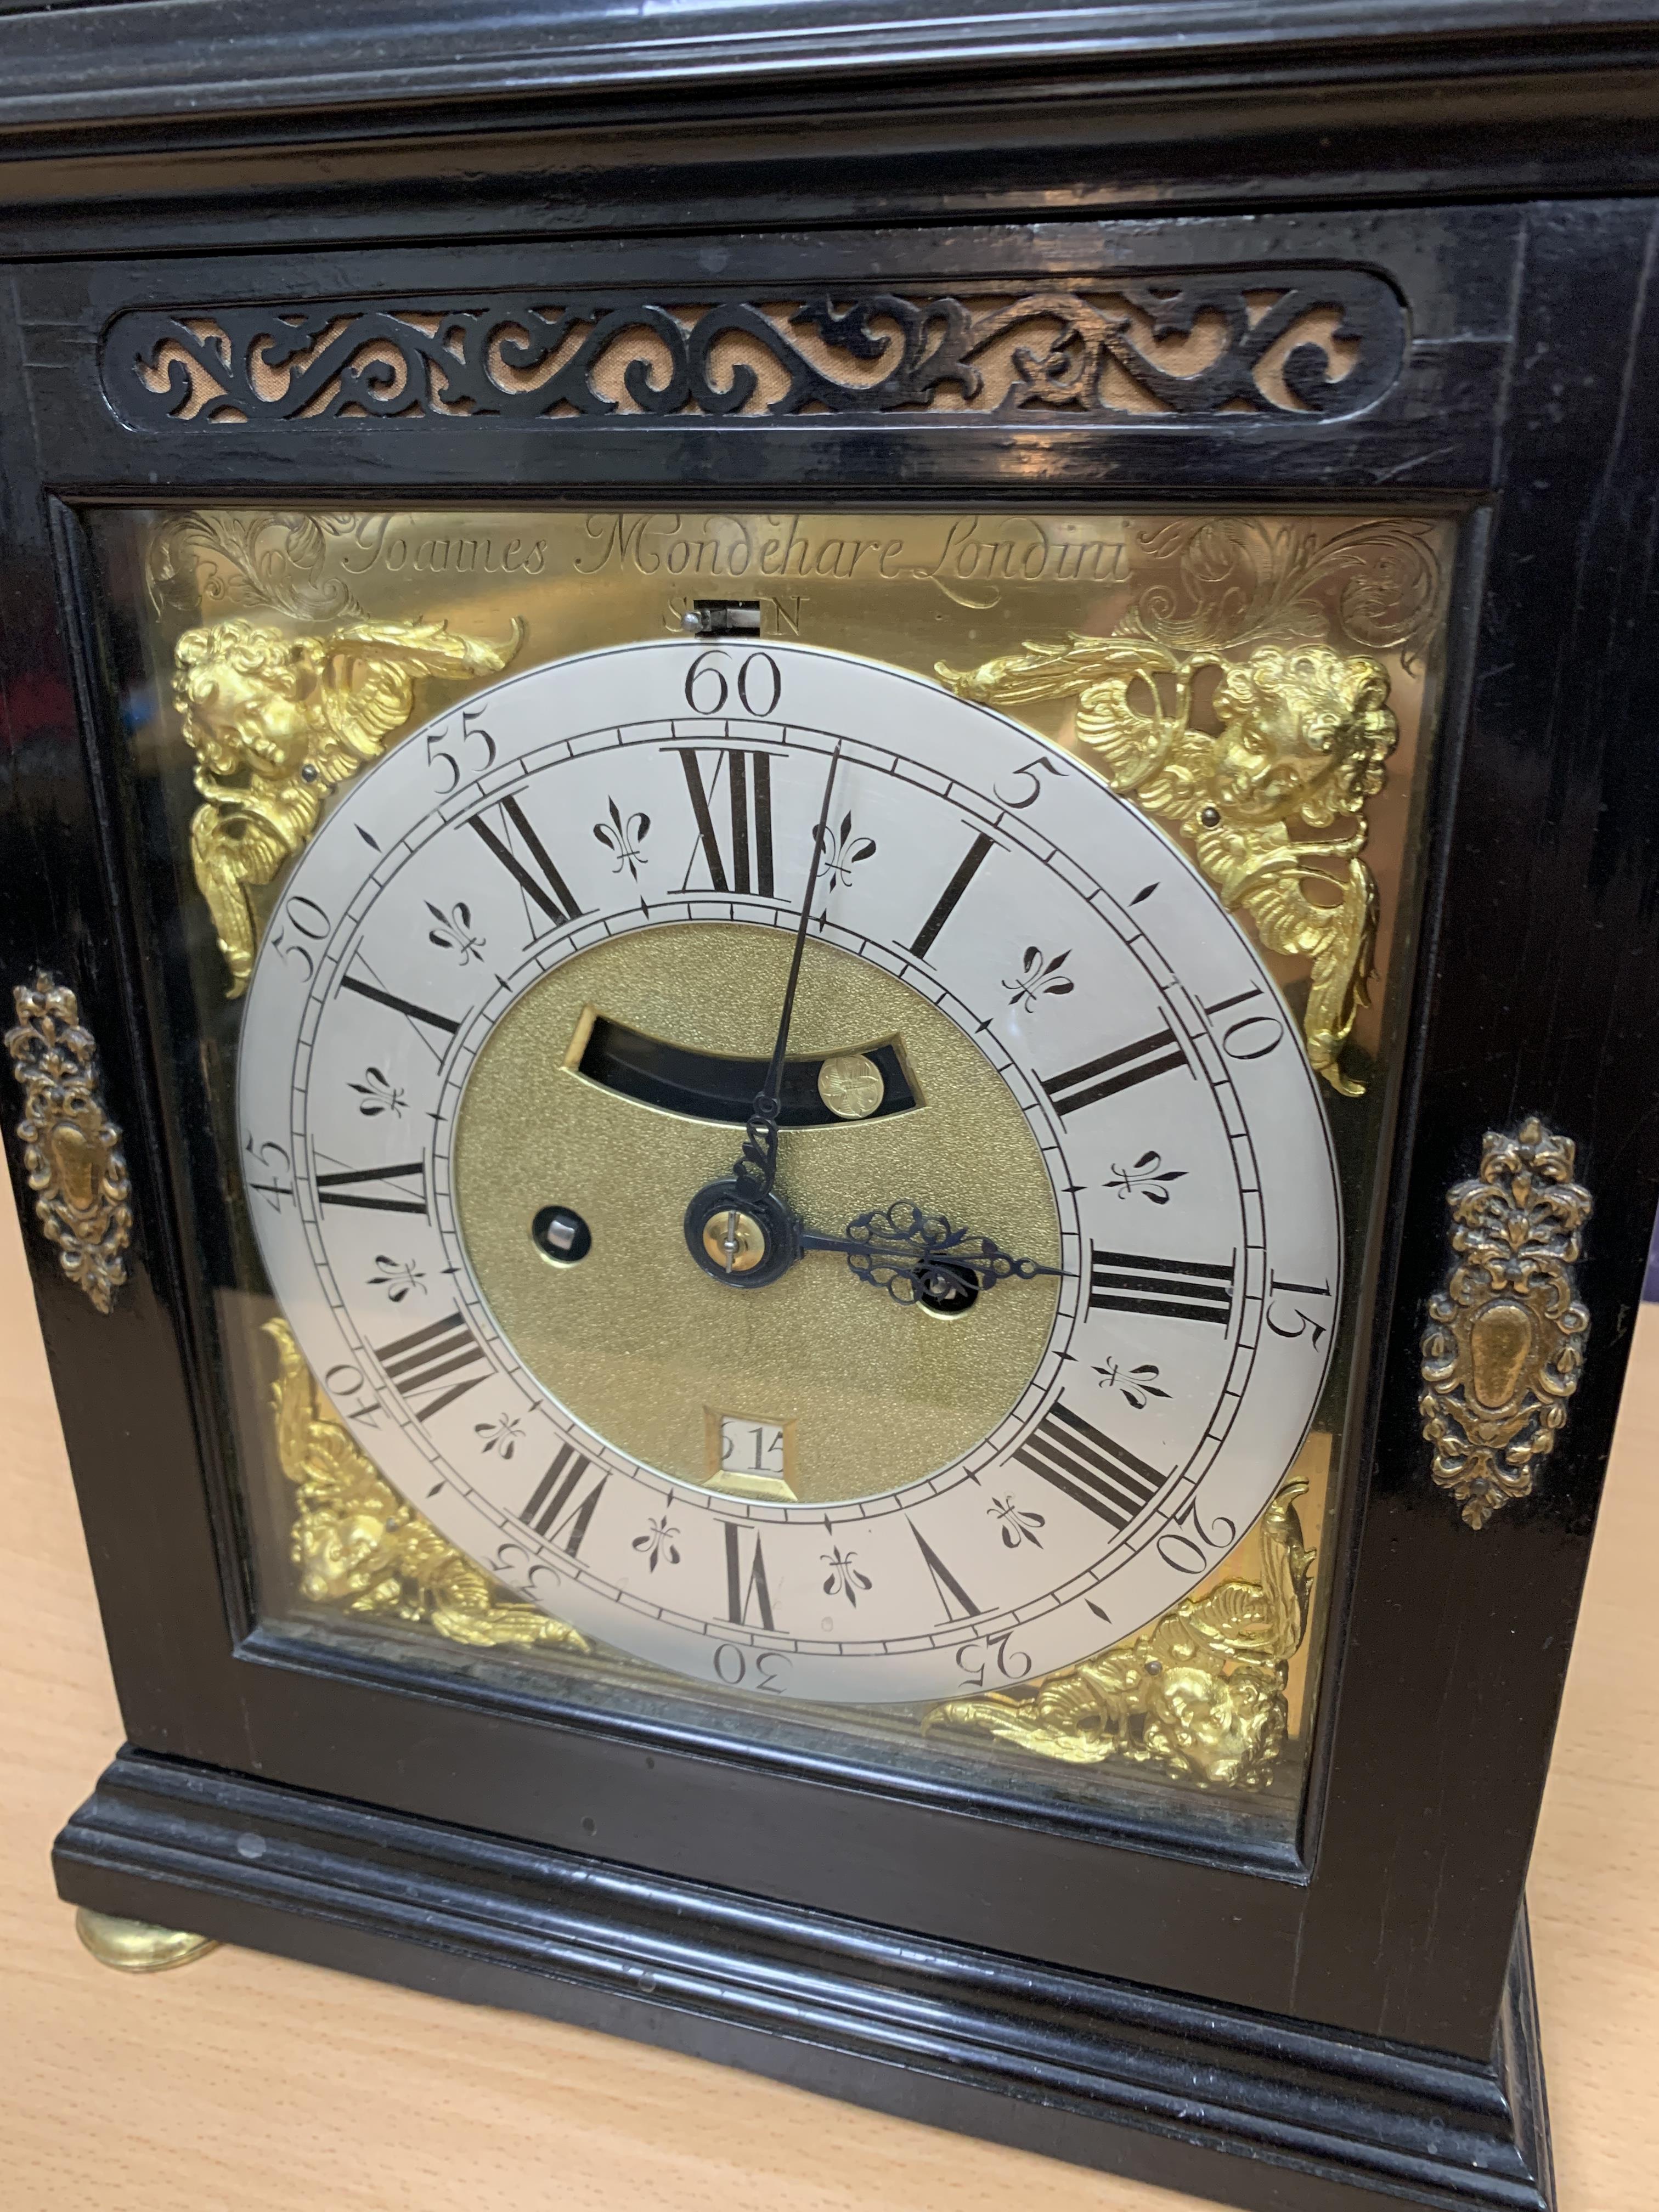 A QUEEN ANNE EBONISED BRACKET CLOCK BY JOANNES MONDEHARE LONDON, LATE 17TH / EARLY 18TH CENTURY - Image 2 of 14